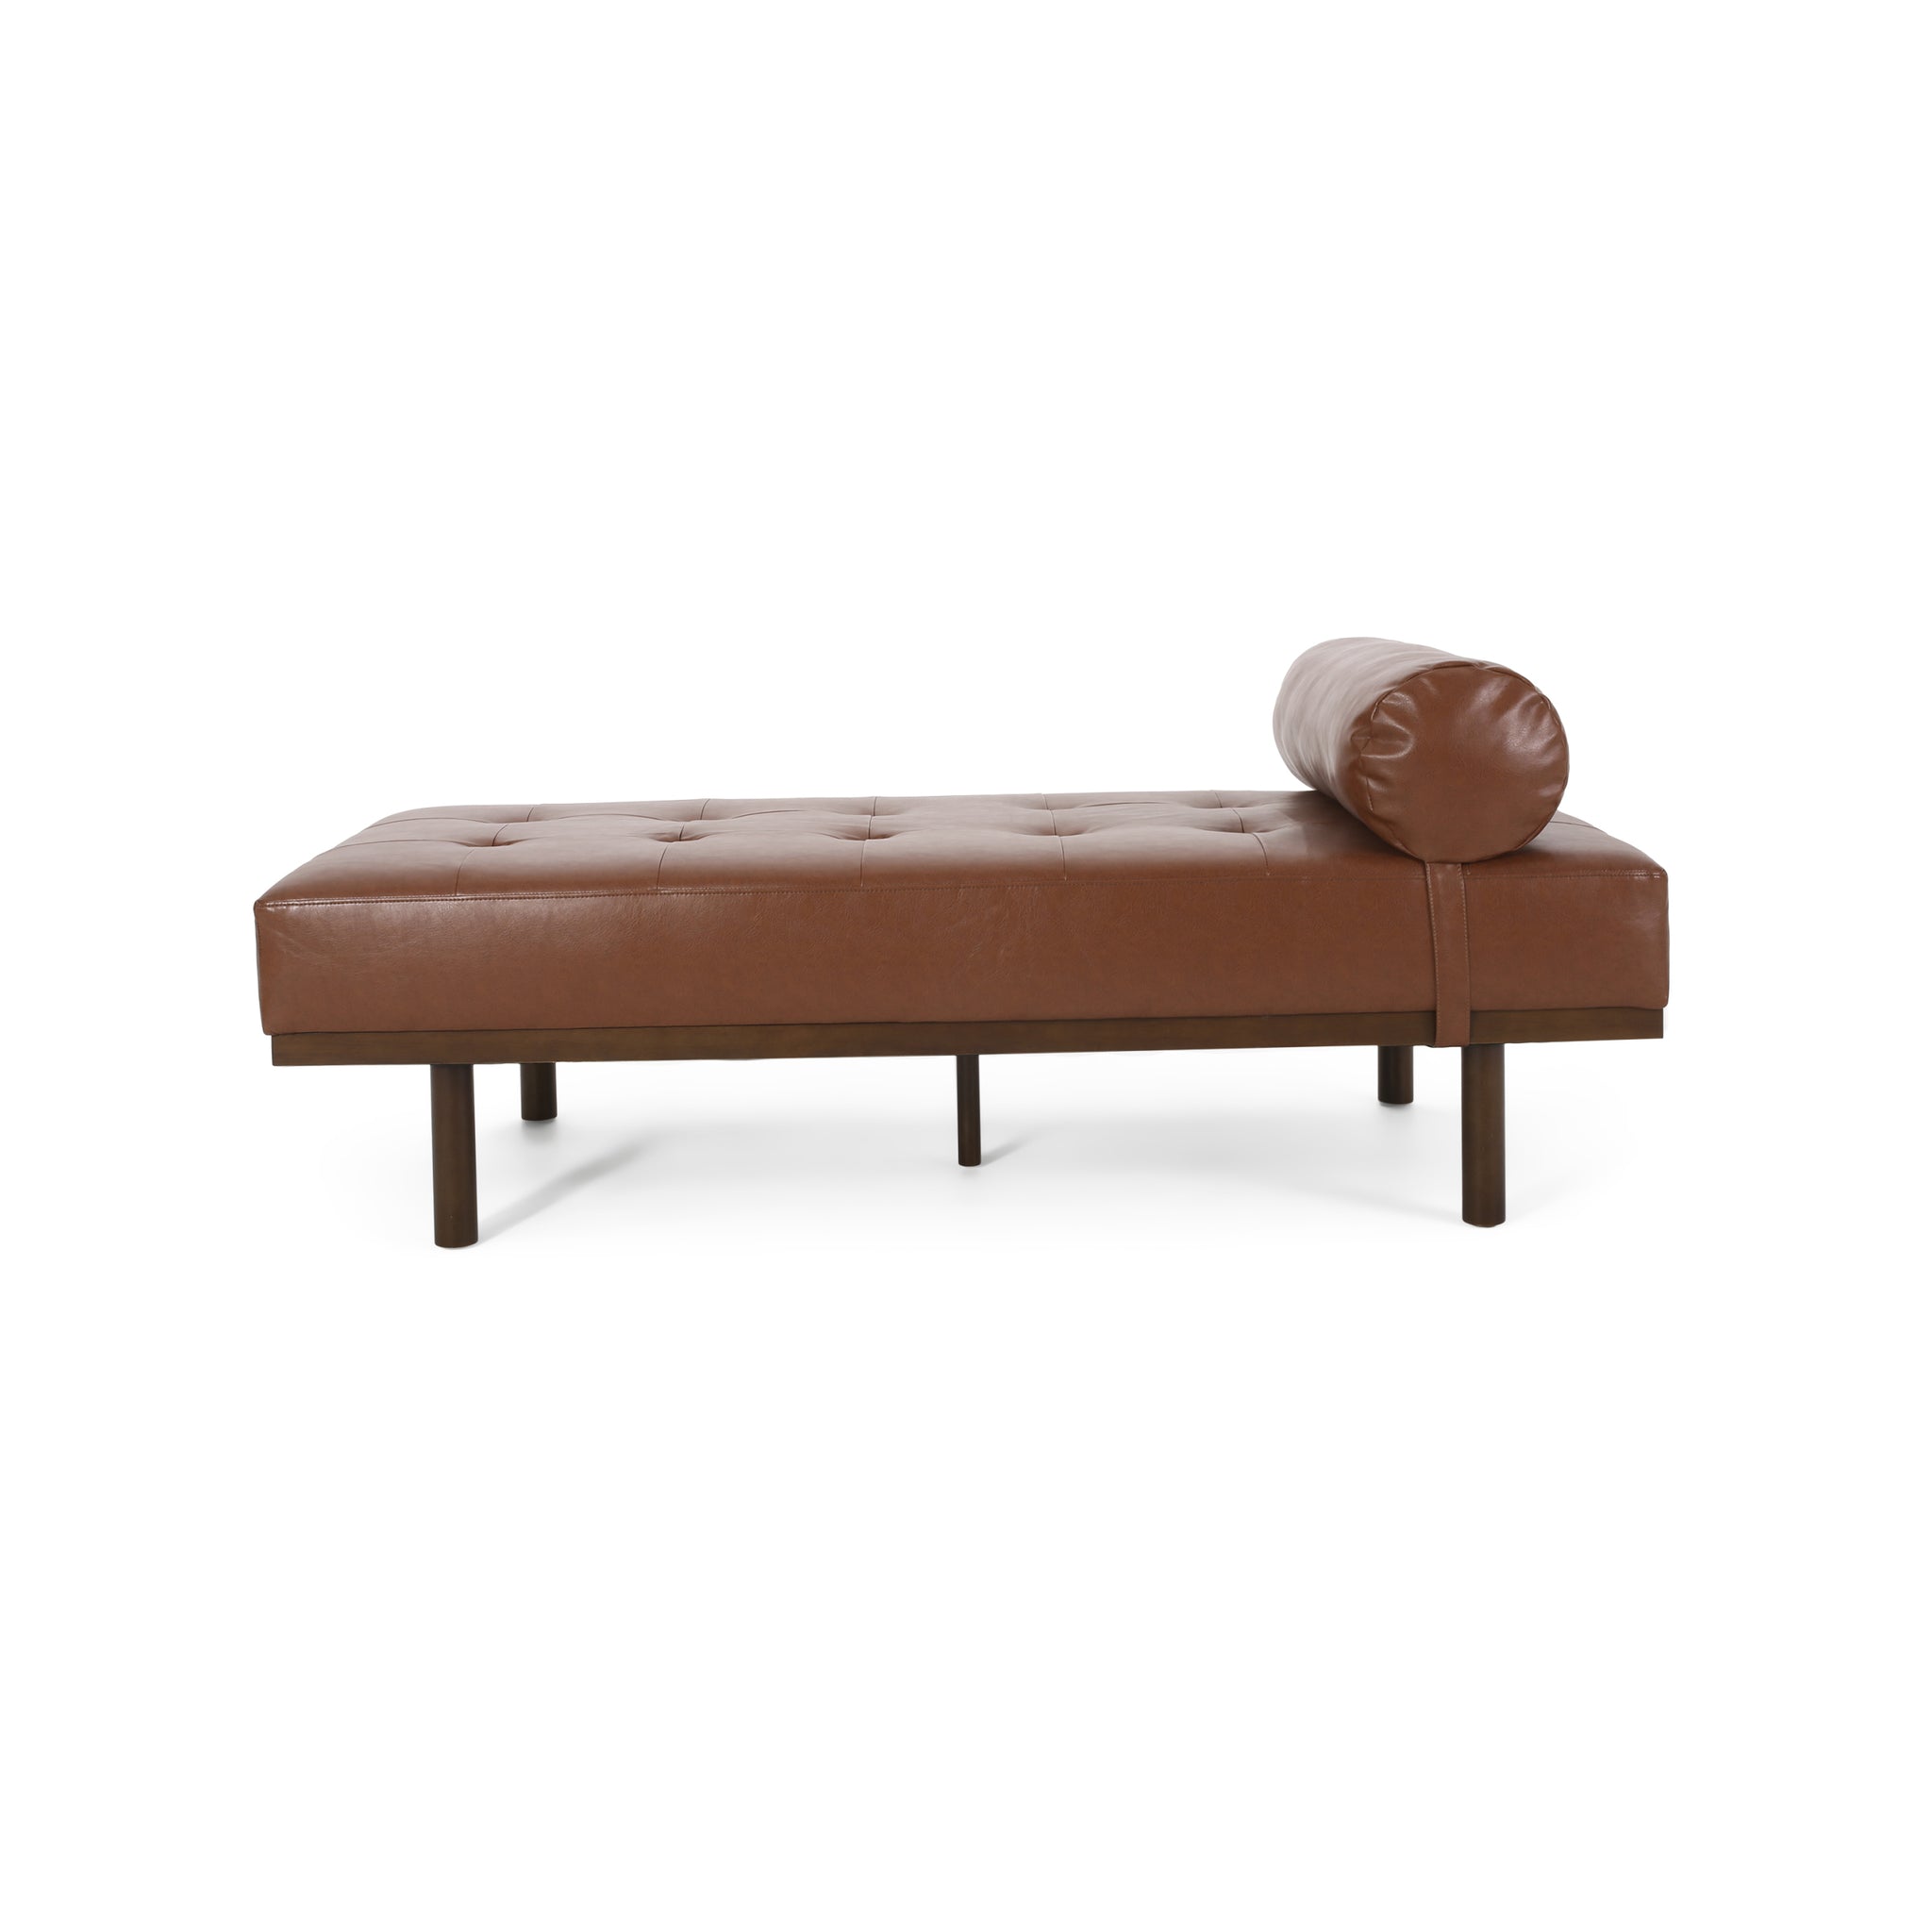 CHAISE LOUNGE light brown-pu leather